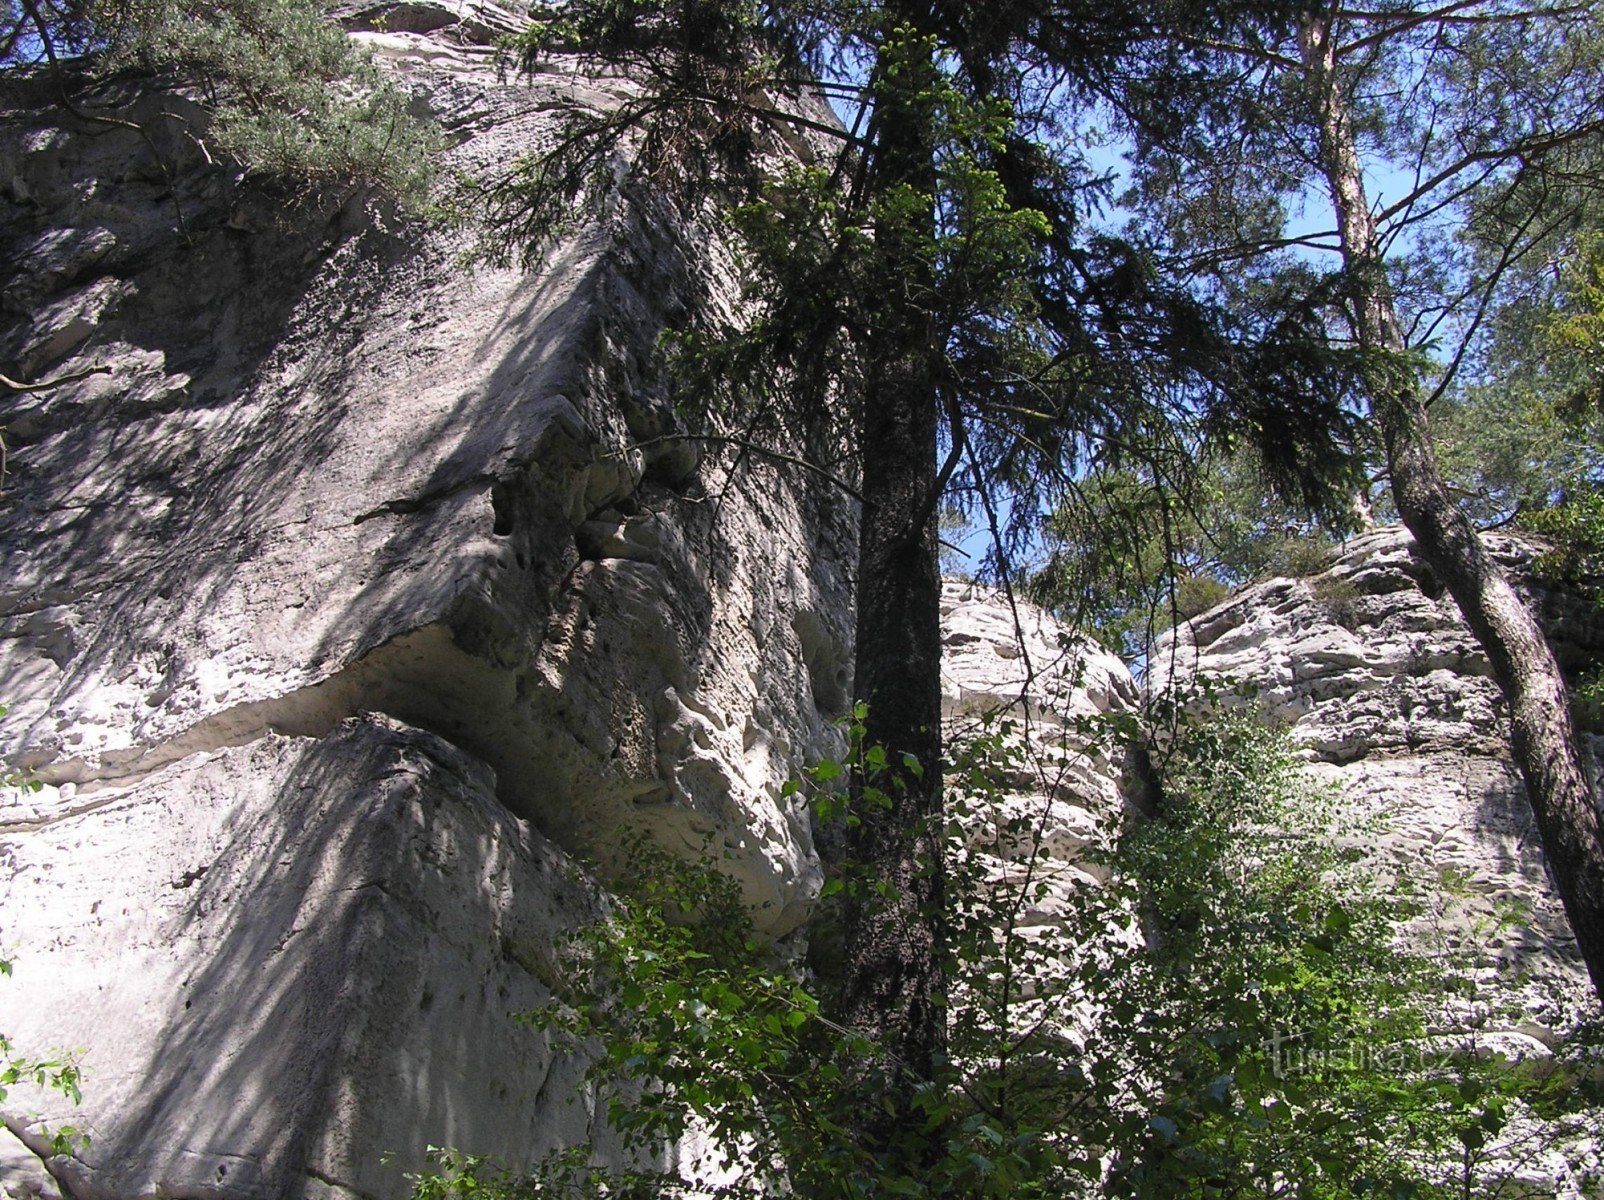 the walls of the Devil's hand from the blue tourist sign below the Janová lookout